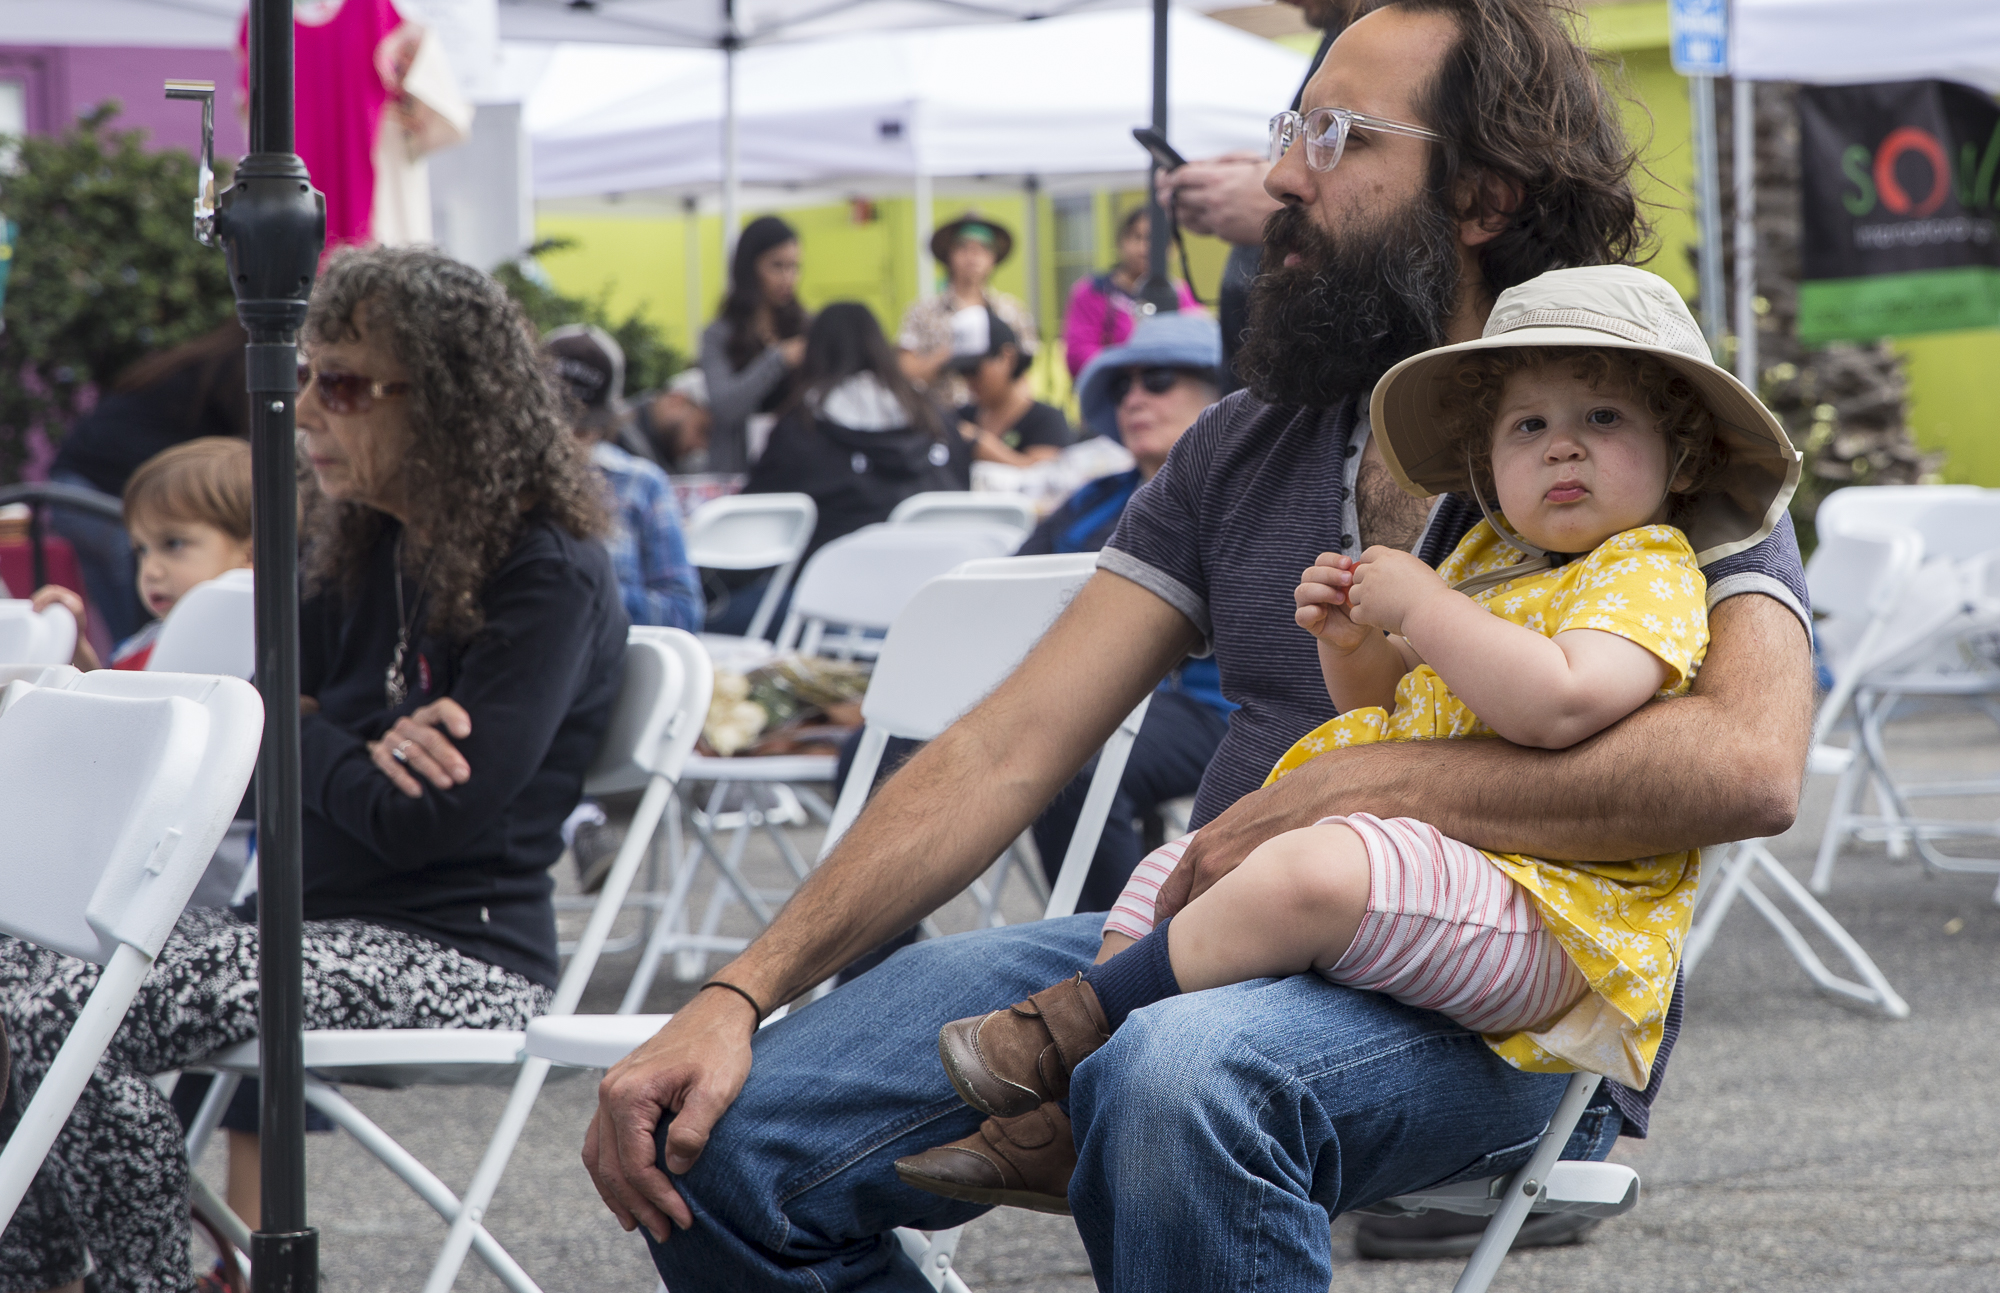  A family watches the various cultural and youth based performances during the Pico Block Party festivities that took place at the 18th street Arts Center in Santa Monica, California on Saturday May 19, 2018. The Pico Block Party is a celebration of 